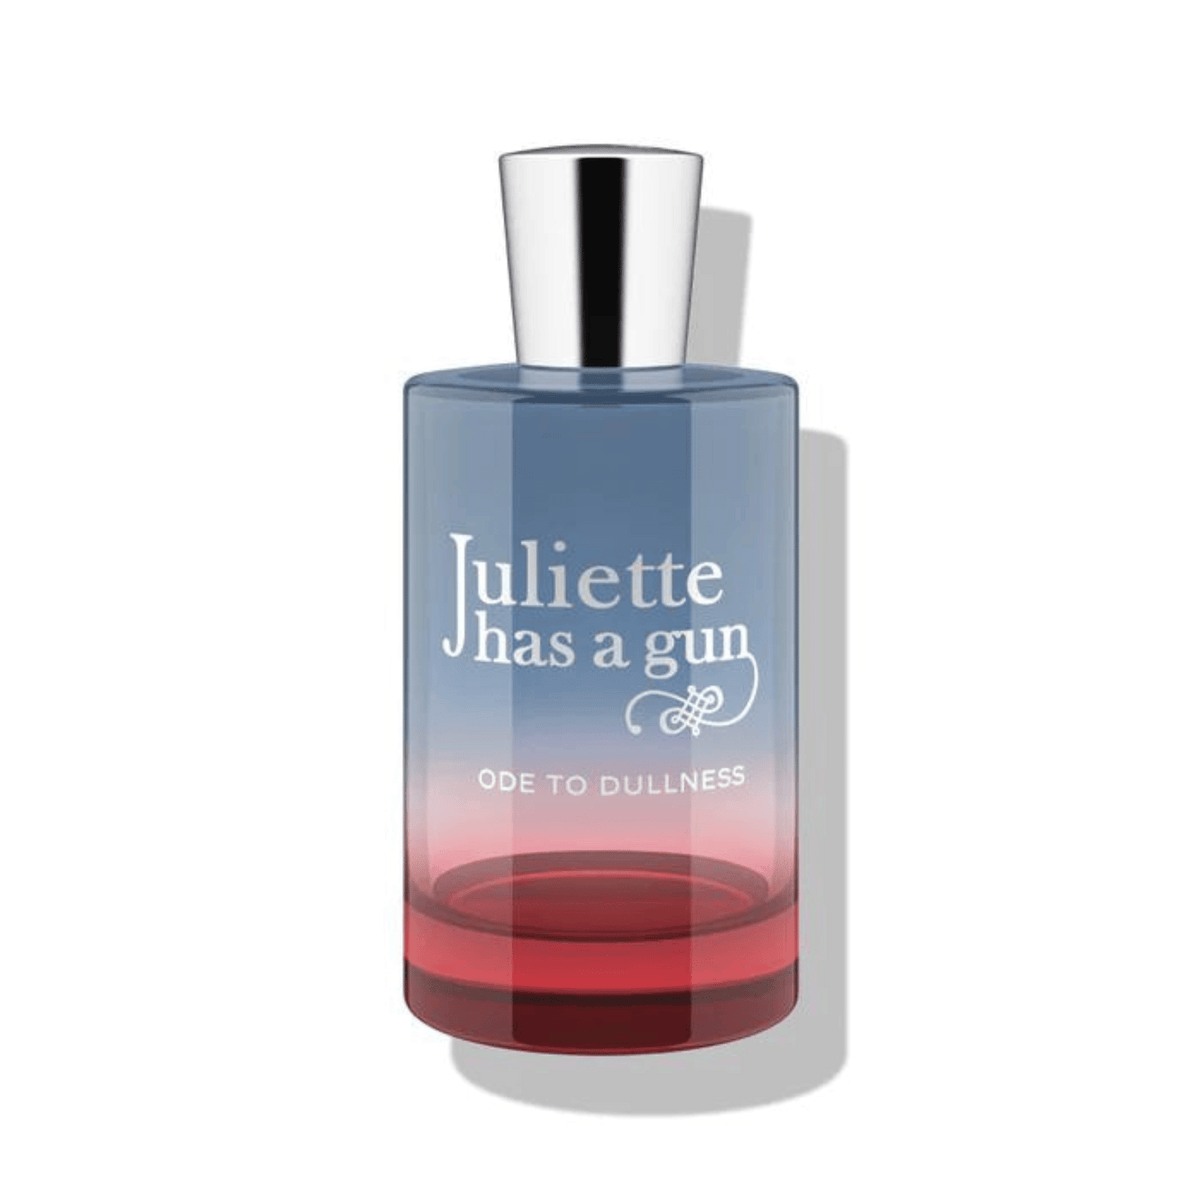 Primary Image of Ode To Dullness EDP